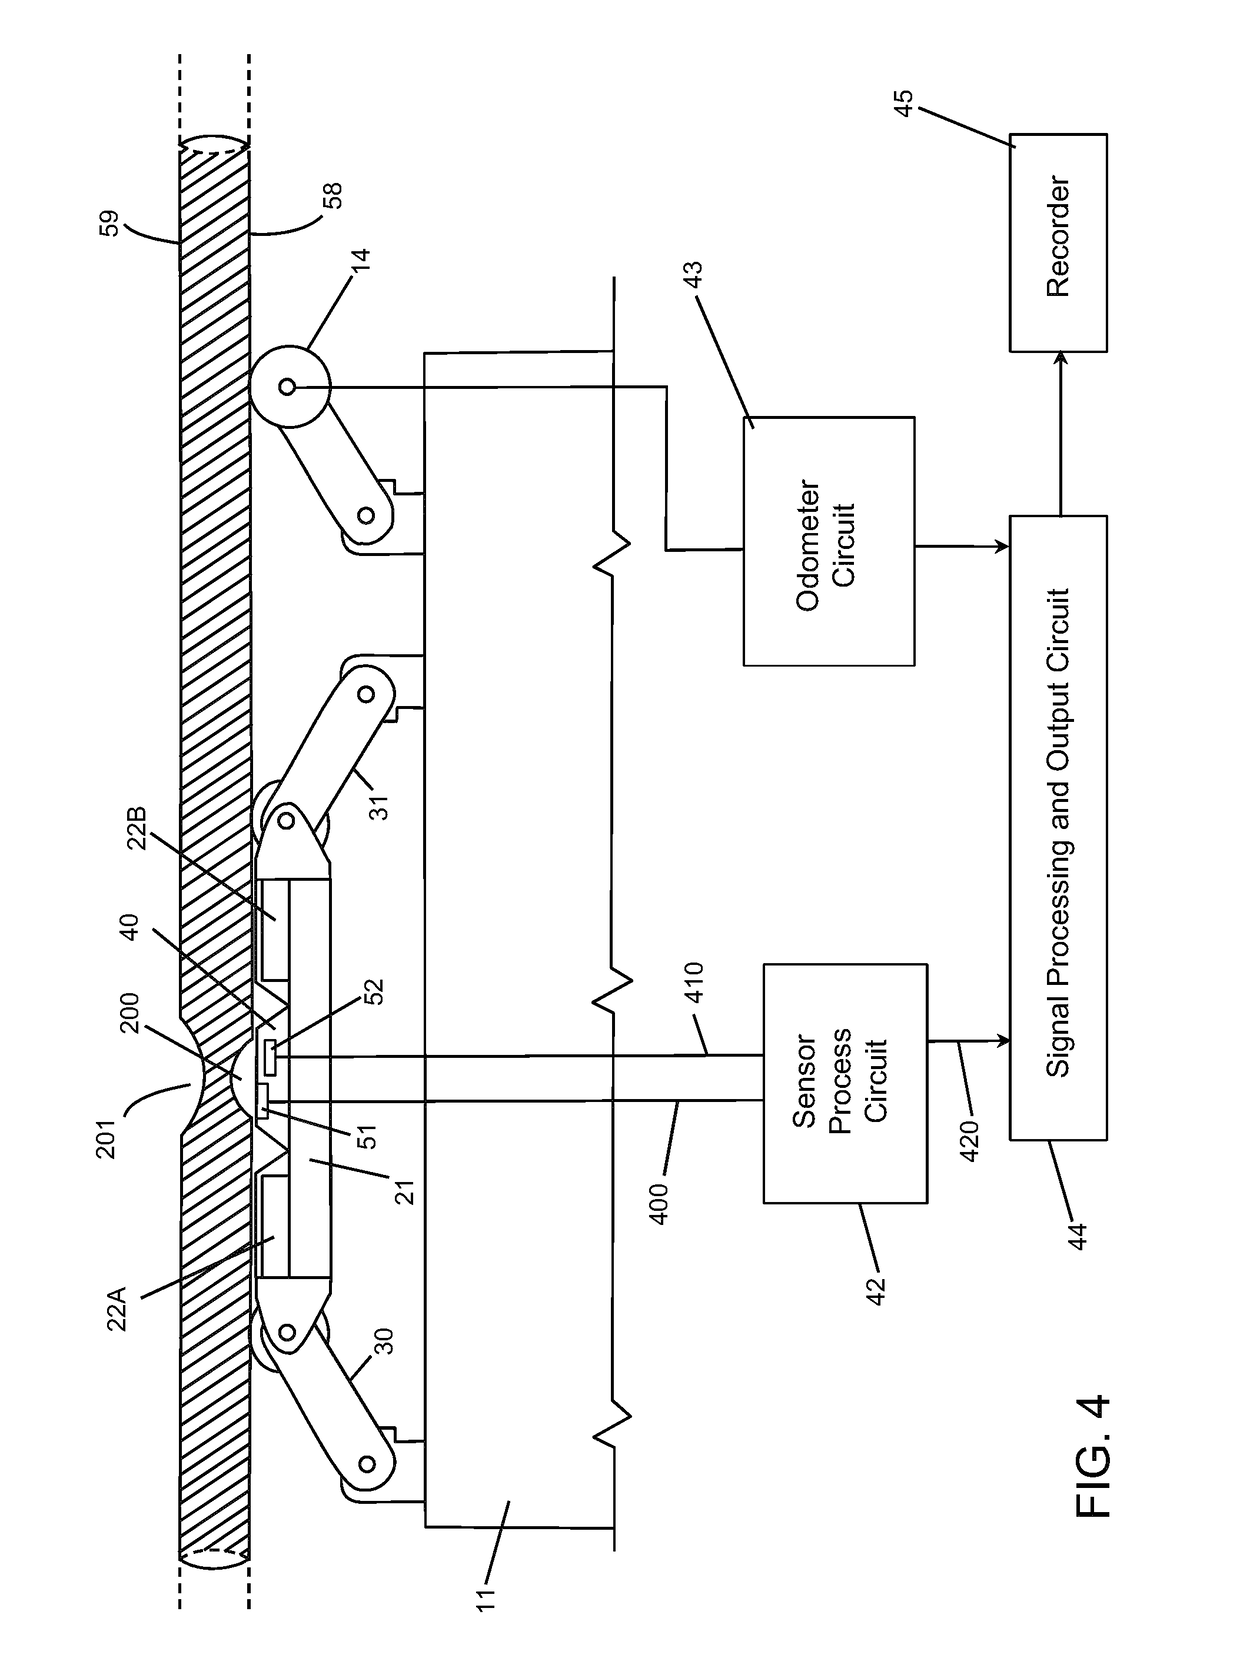 System and Method for Detecting and Characterizing Defects in a Pipe